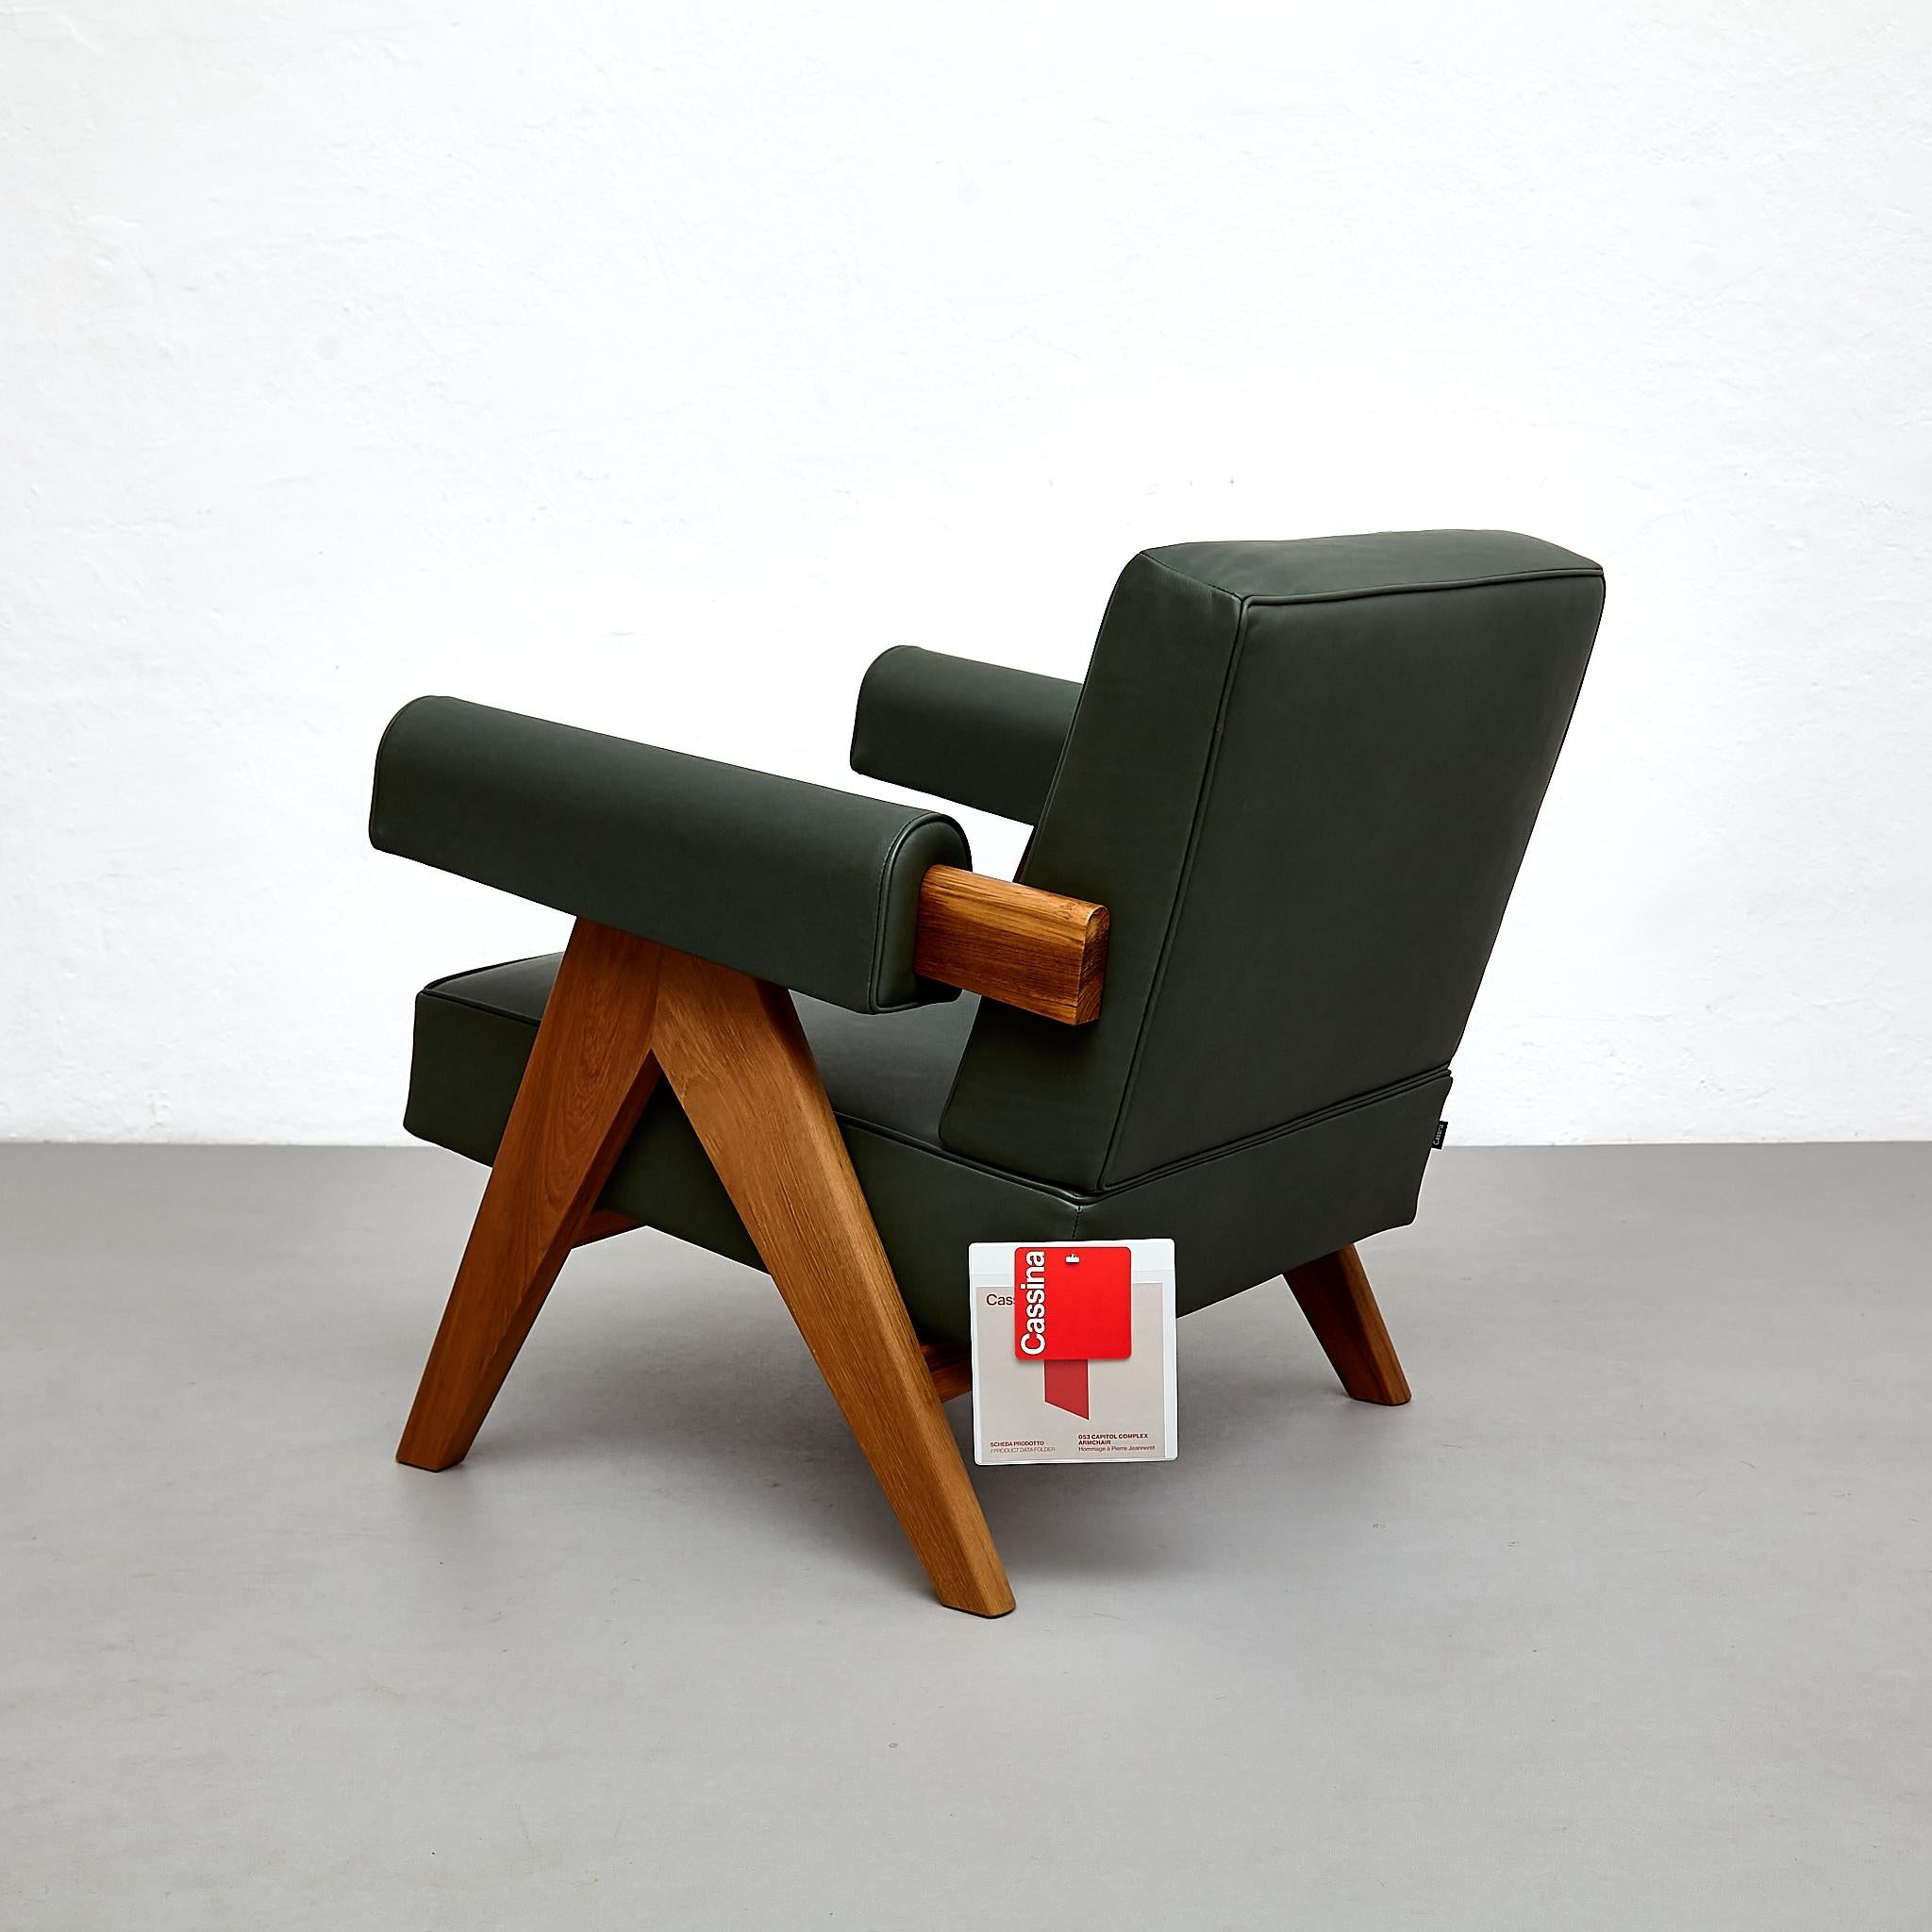 Set of Two Pierre Jeanneret Teak Wood Green Leather Armchair by Cassina For Sale 4